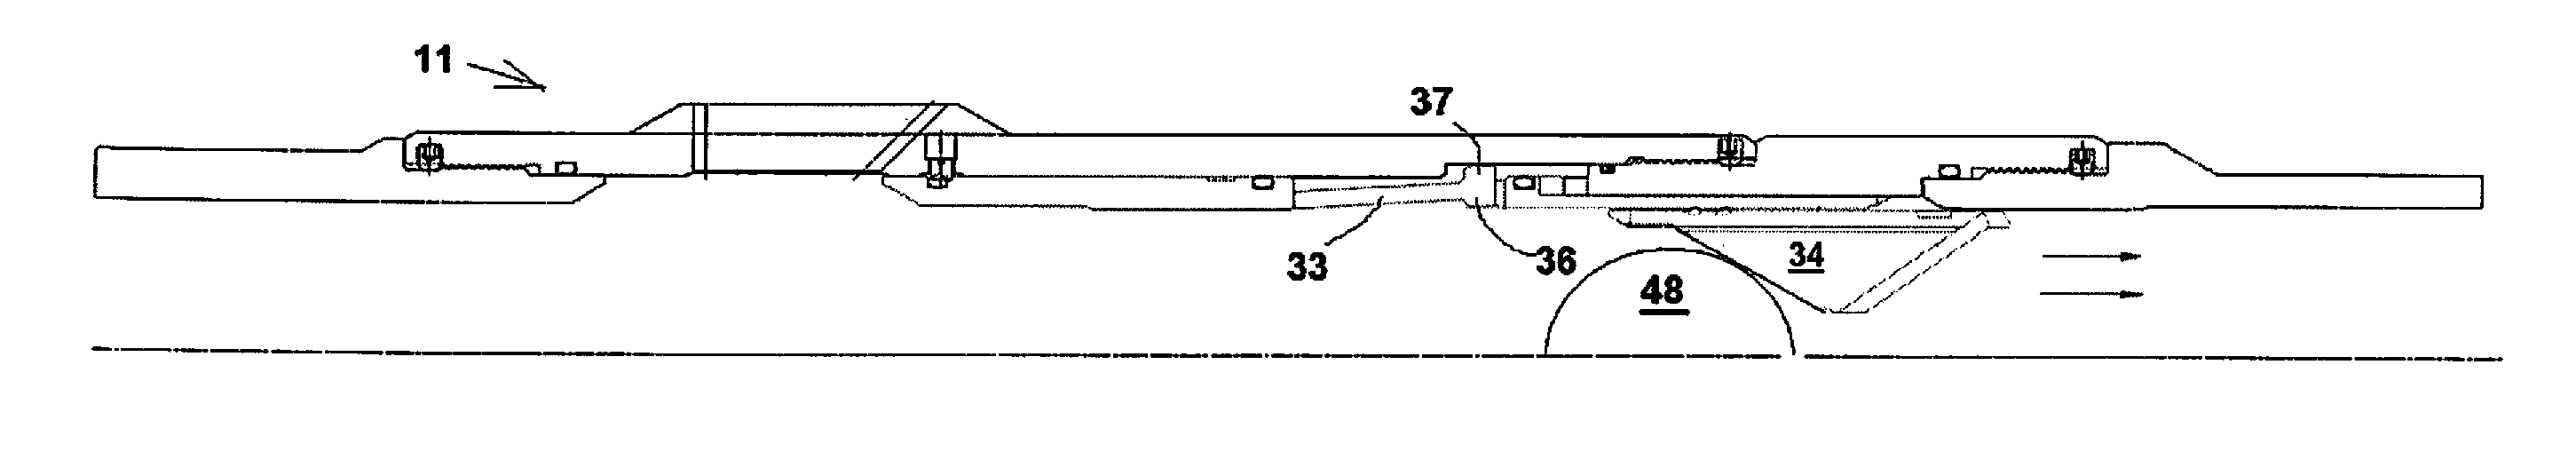 Multi-stage liner with cluster valves and method of use